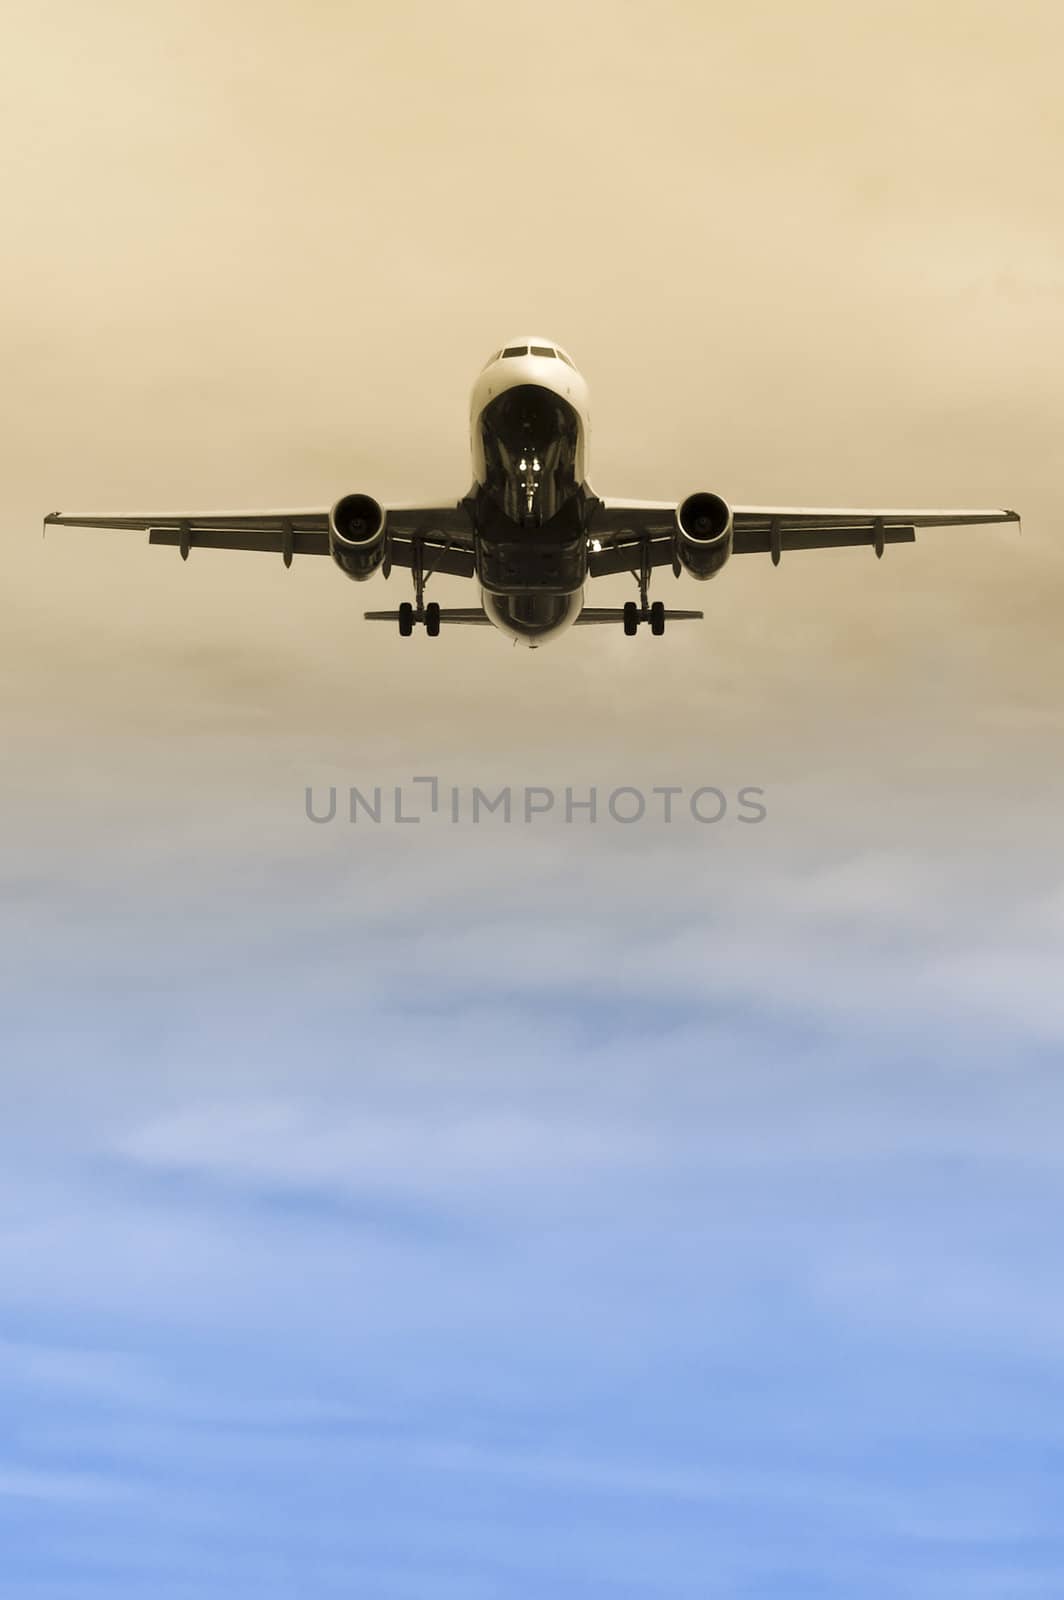 passenger jet on landing approach with gradient coloring